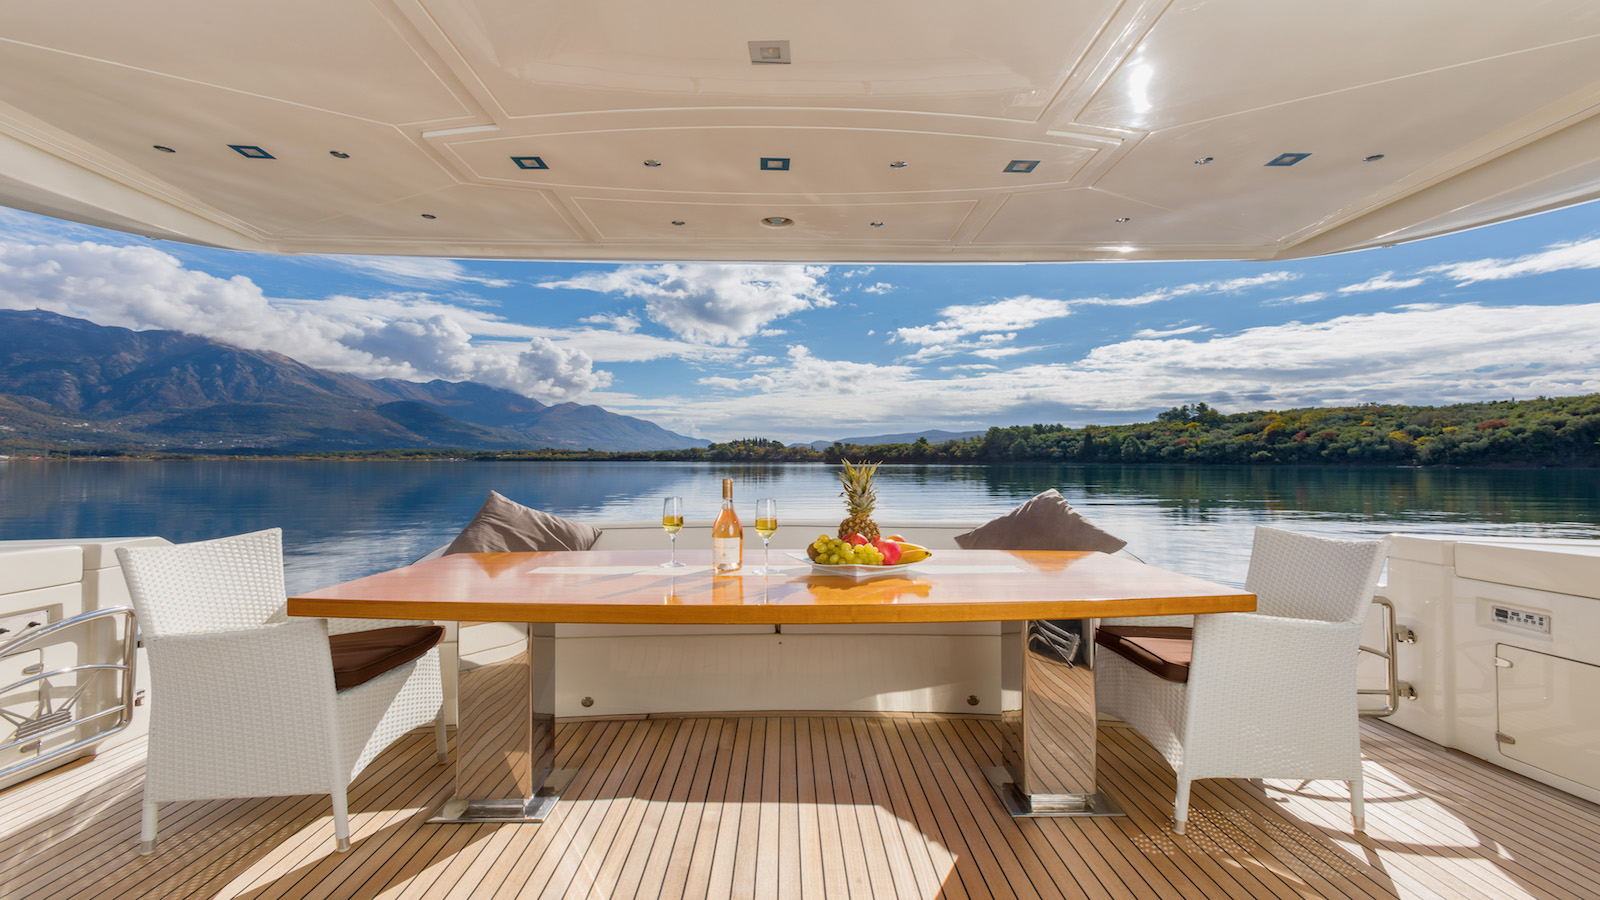 Aft Deck With Table For Alfresco Dining